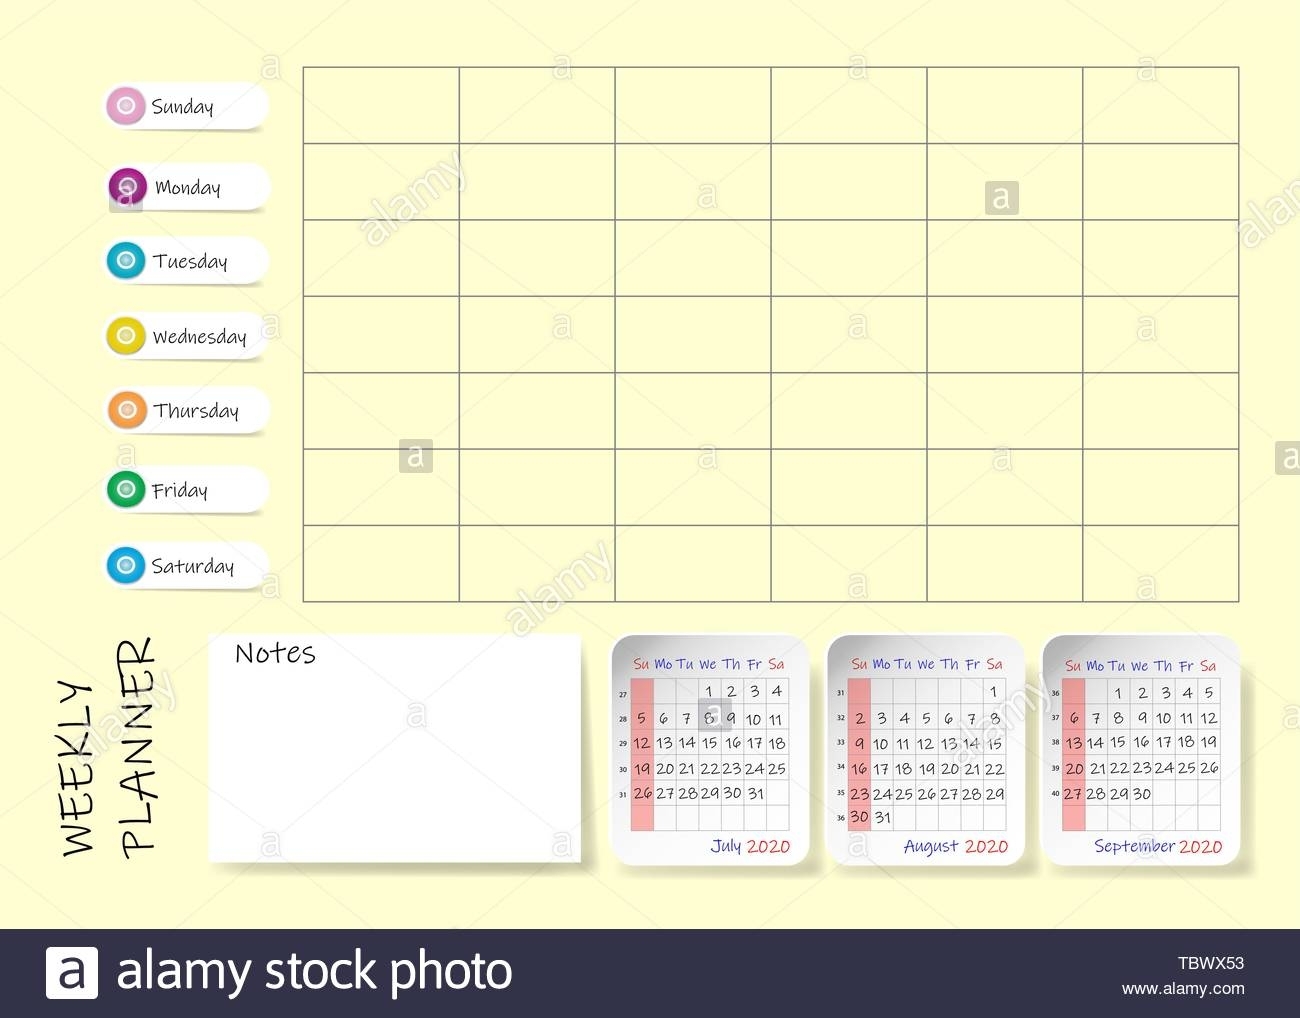 Calendar For Third Quarter Of 2020 Year With Weekly Planner